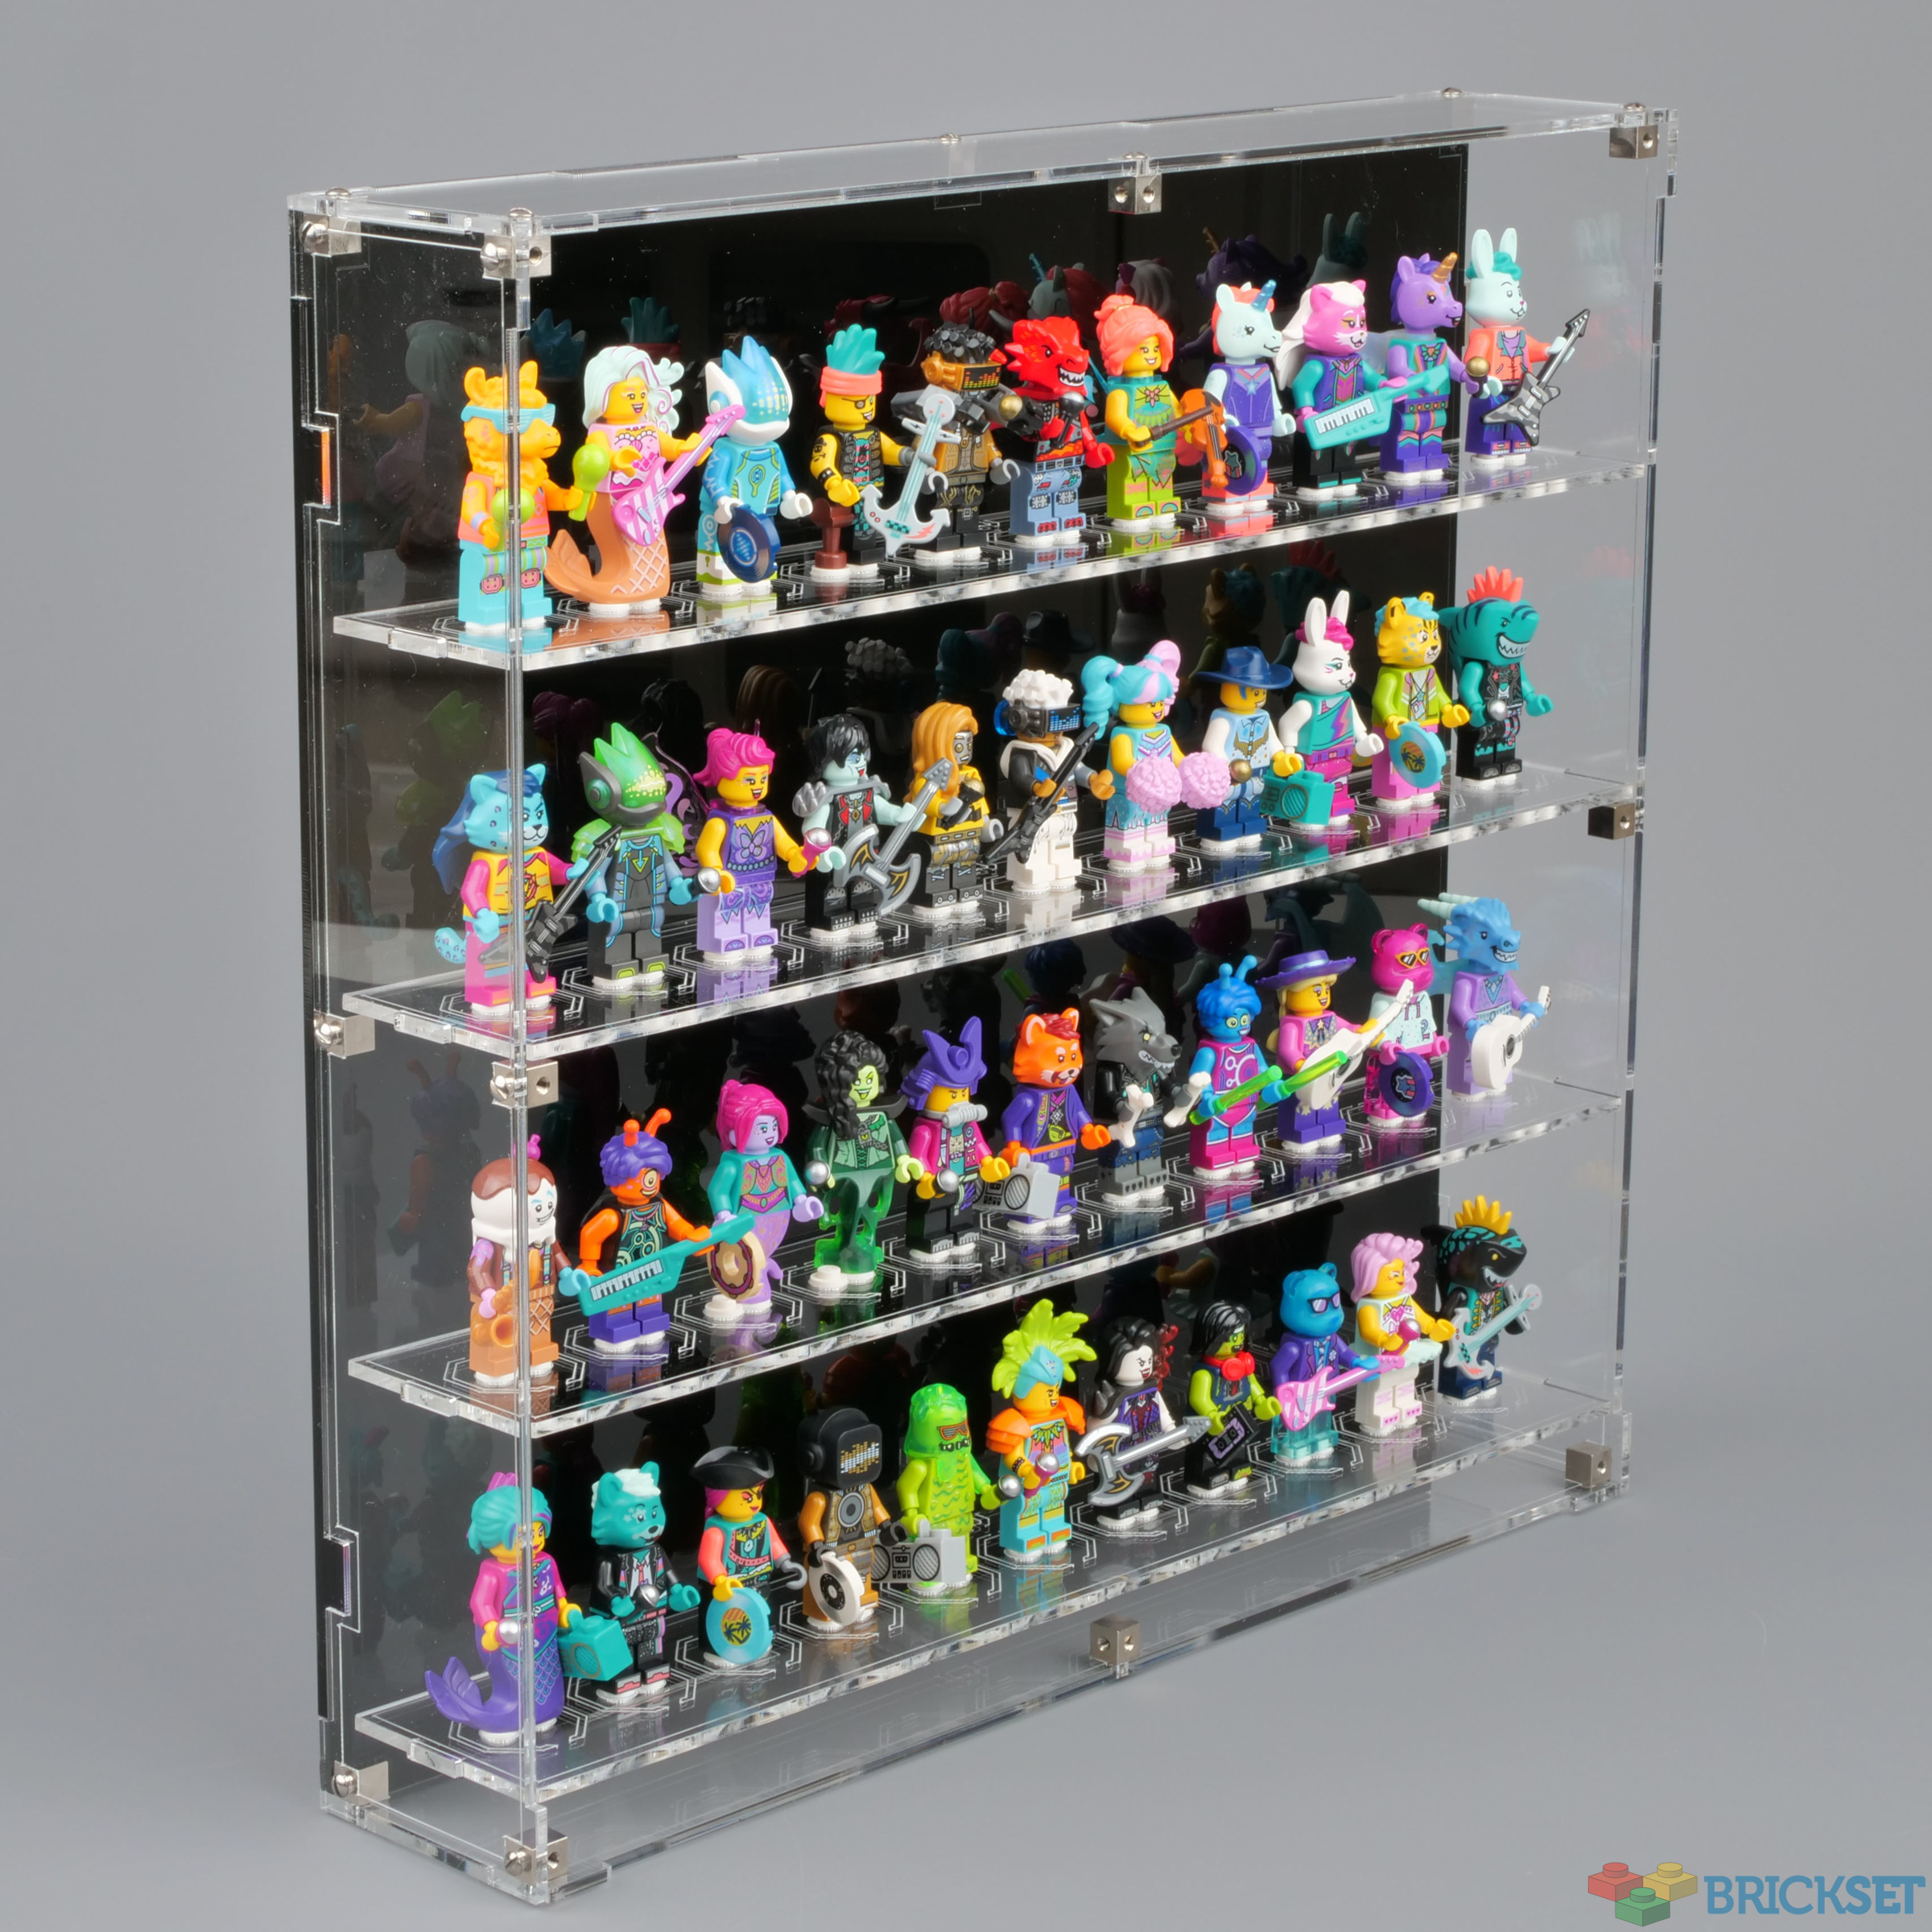 LEGO Wicked Brick wall mounted minifig display cases review | Brickset